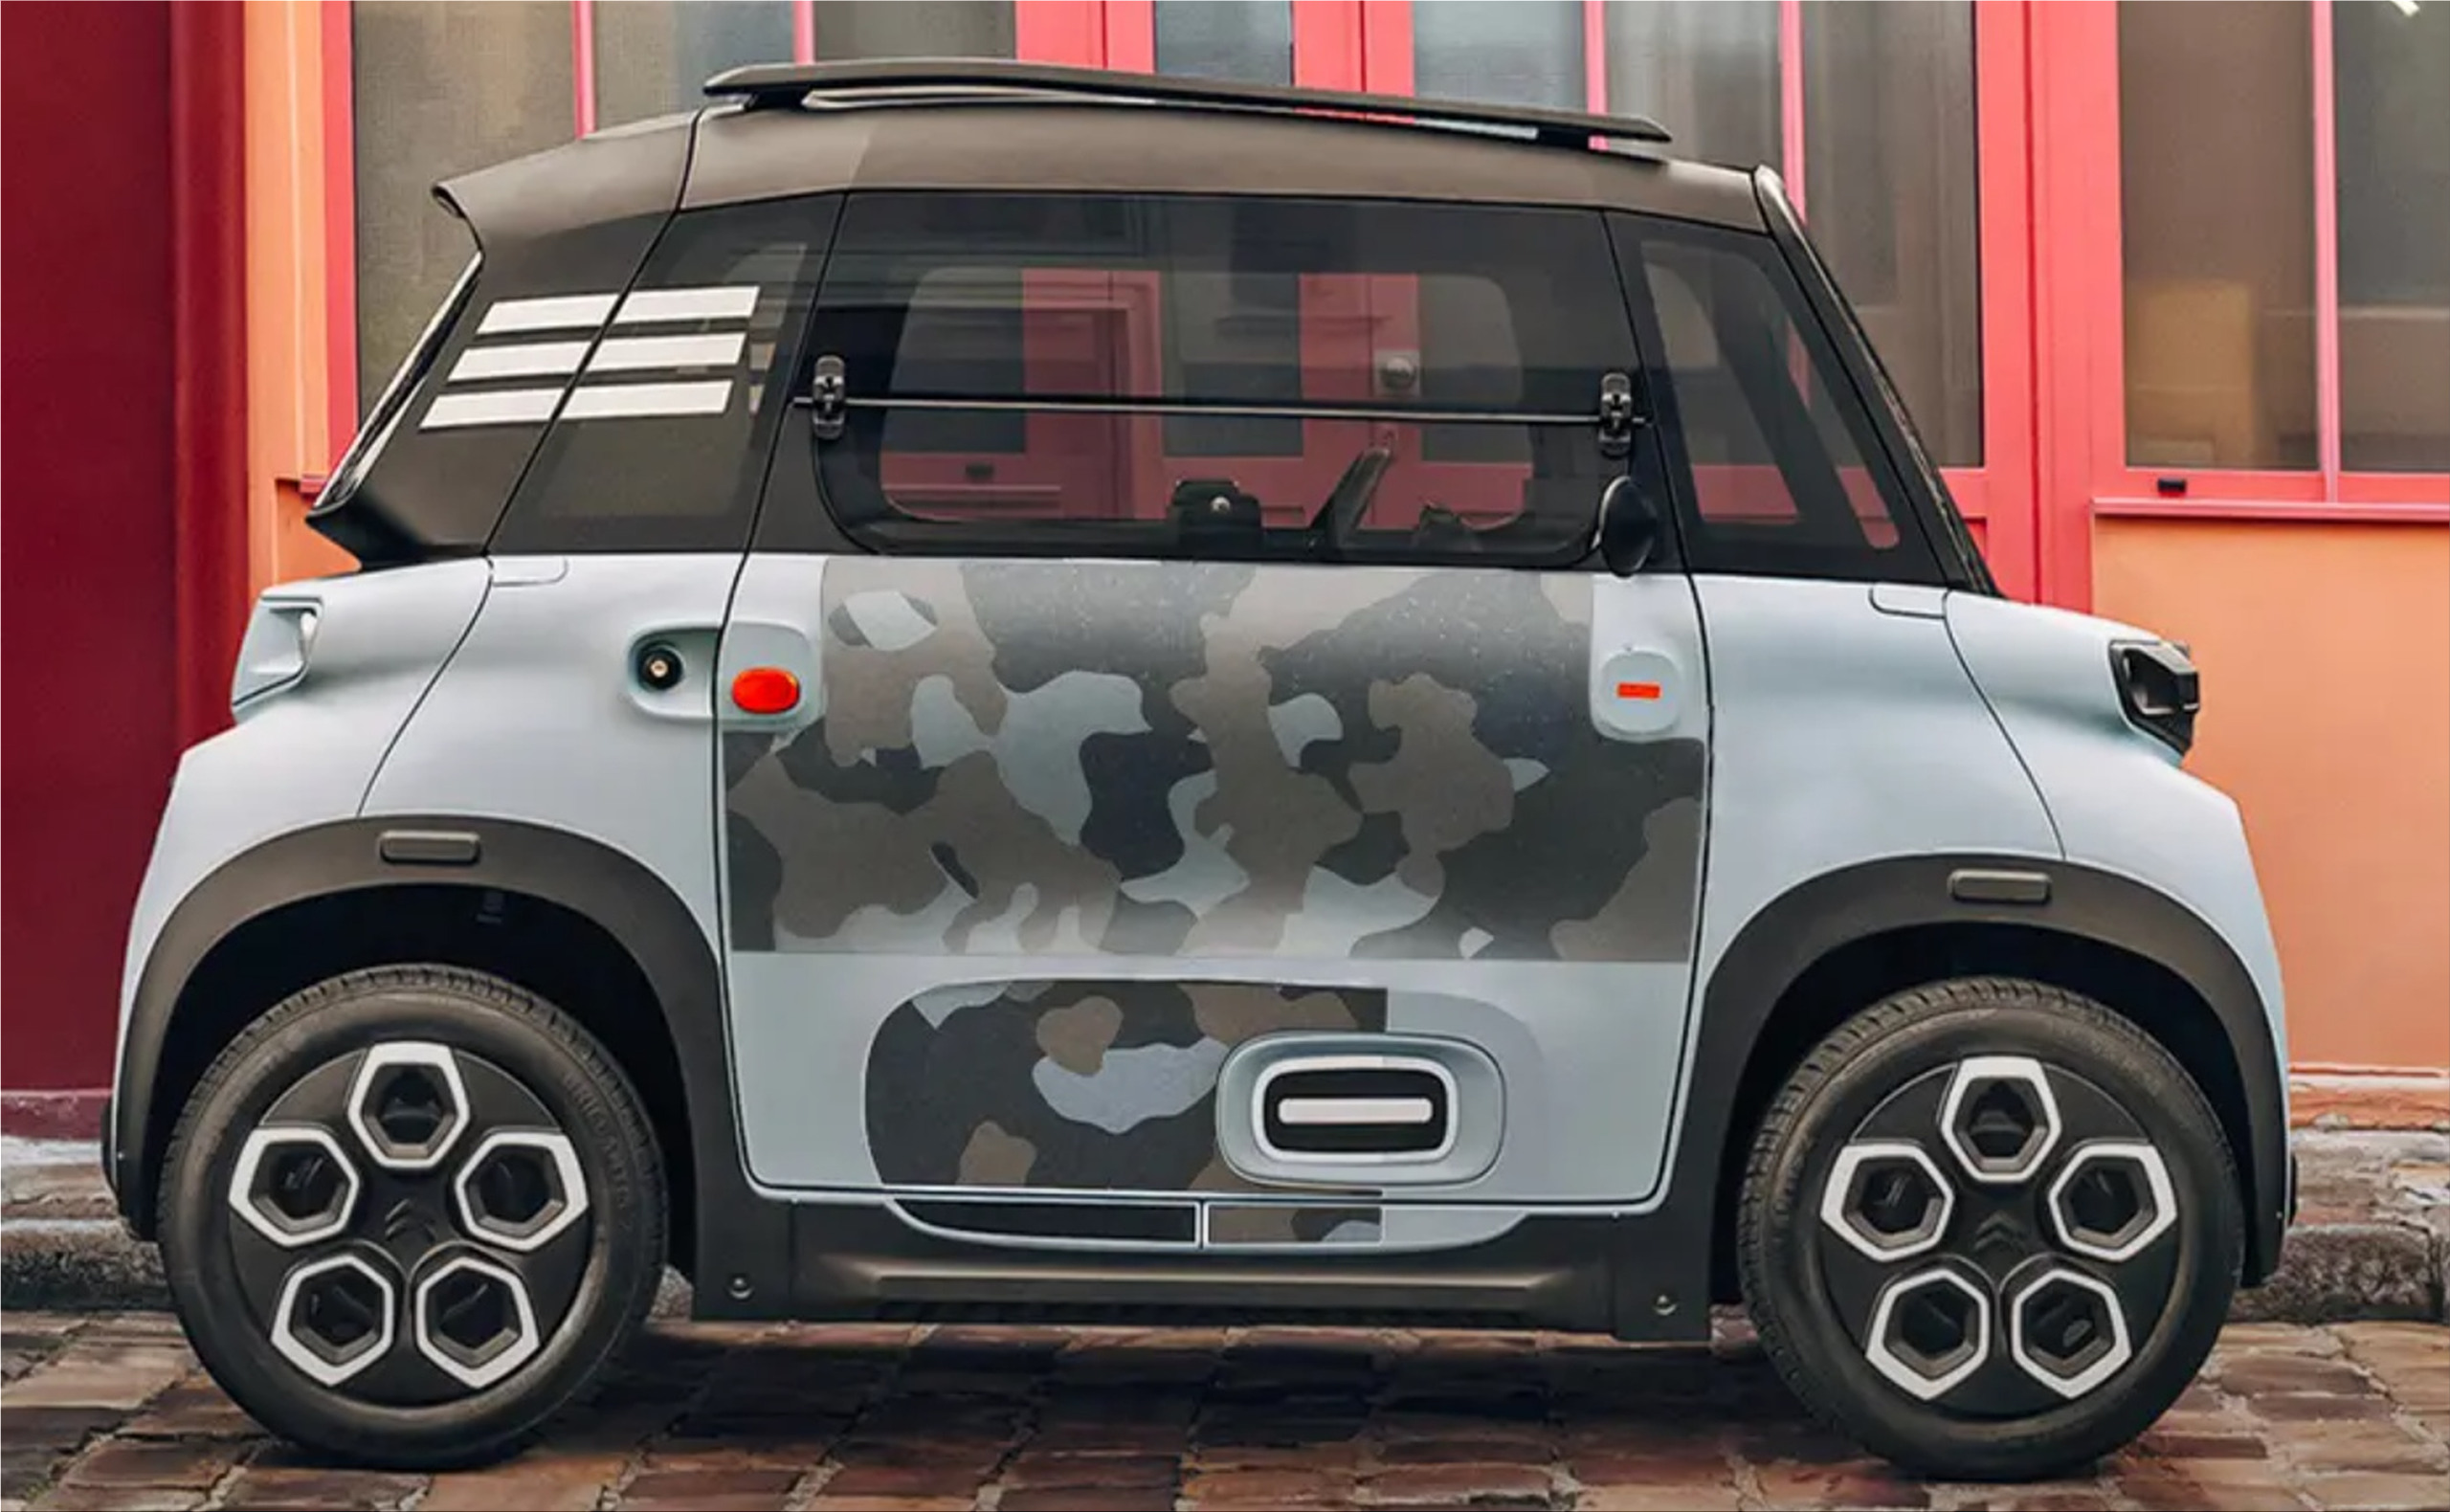 You can lease this adorable Citroen EV for $22 a month and let your  14-year-old drive - CNET